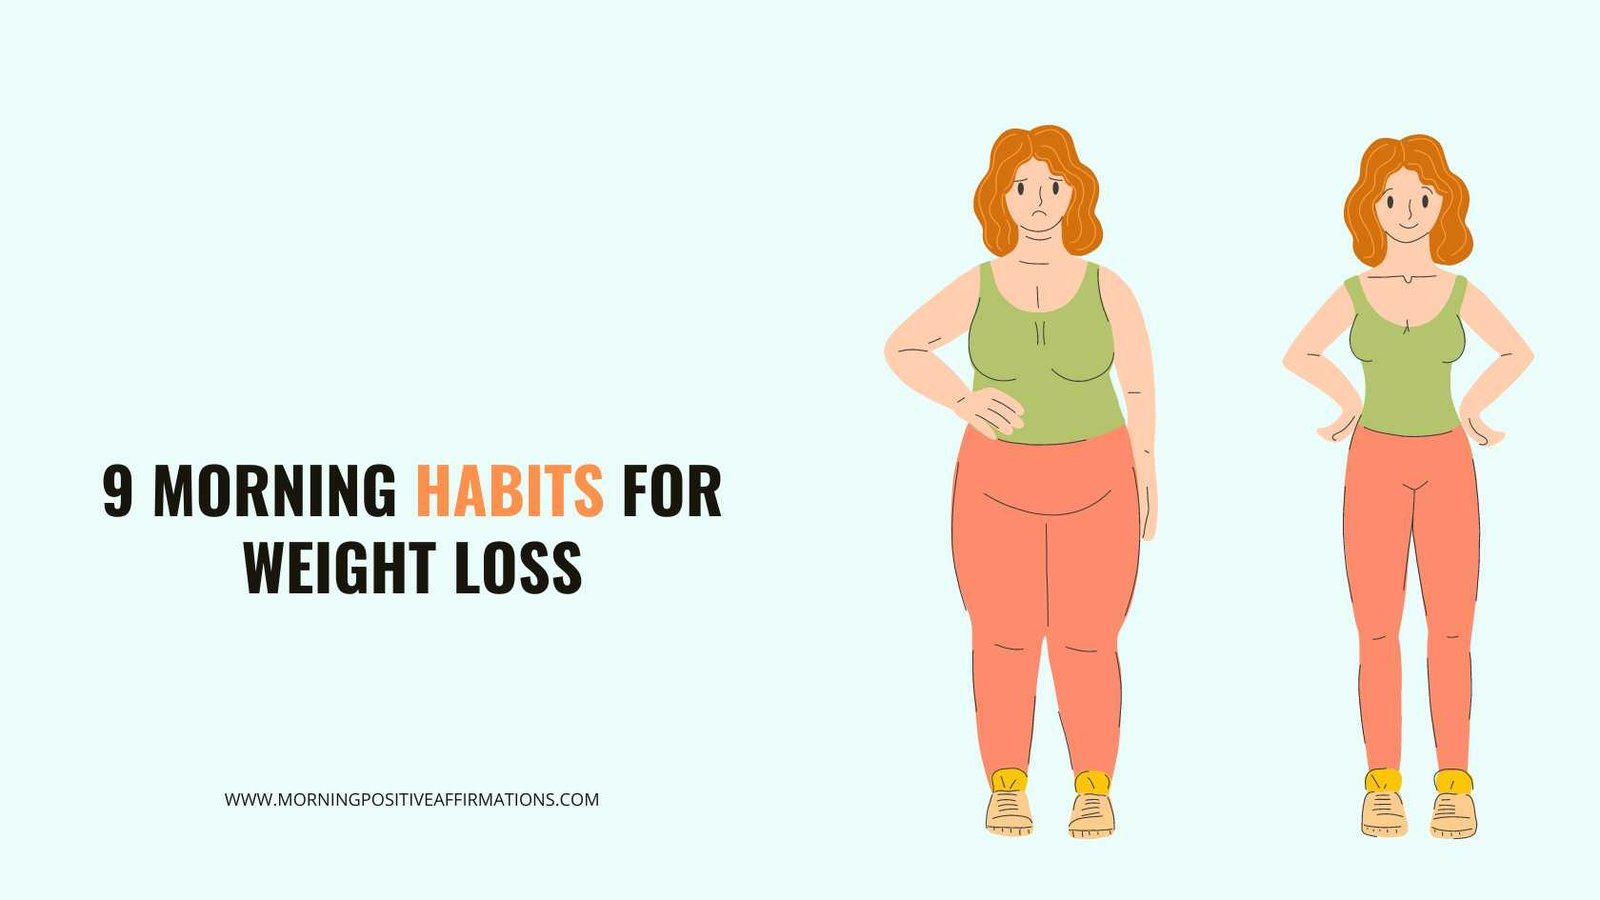 Morning Habits For Weight Loss